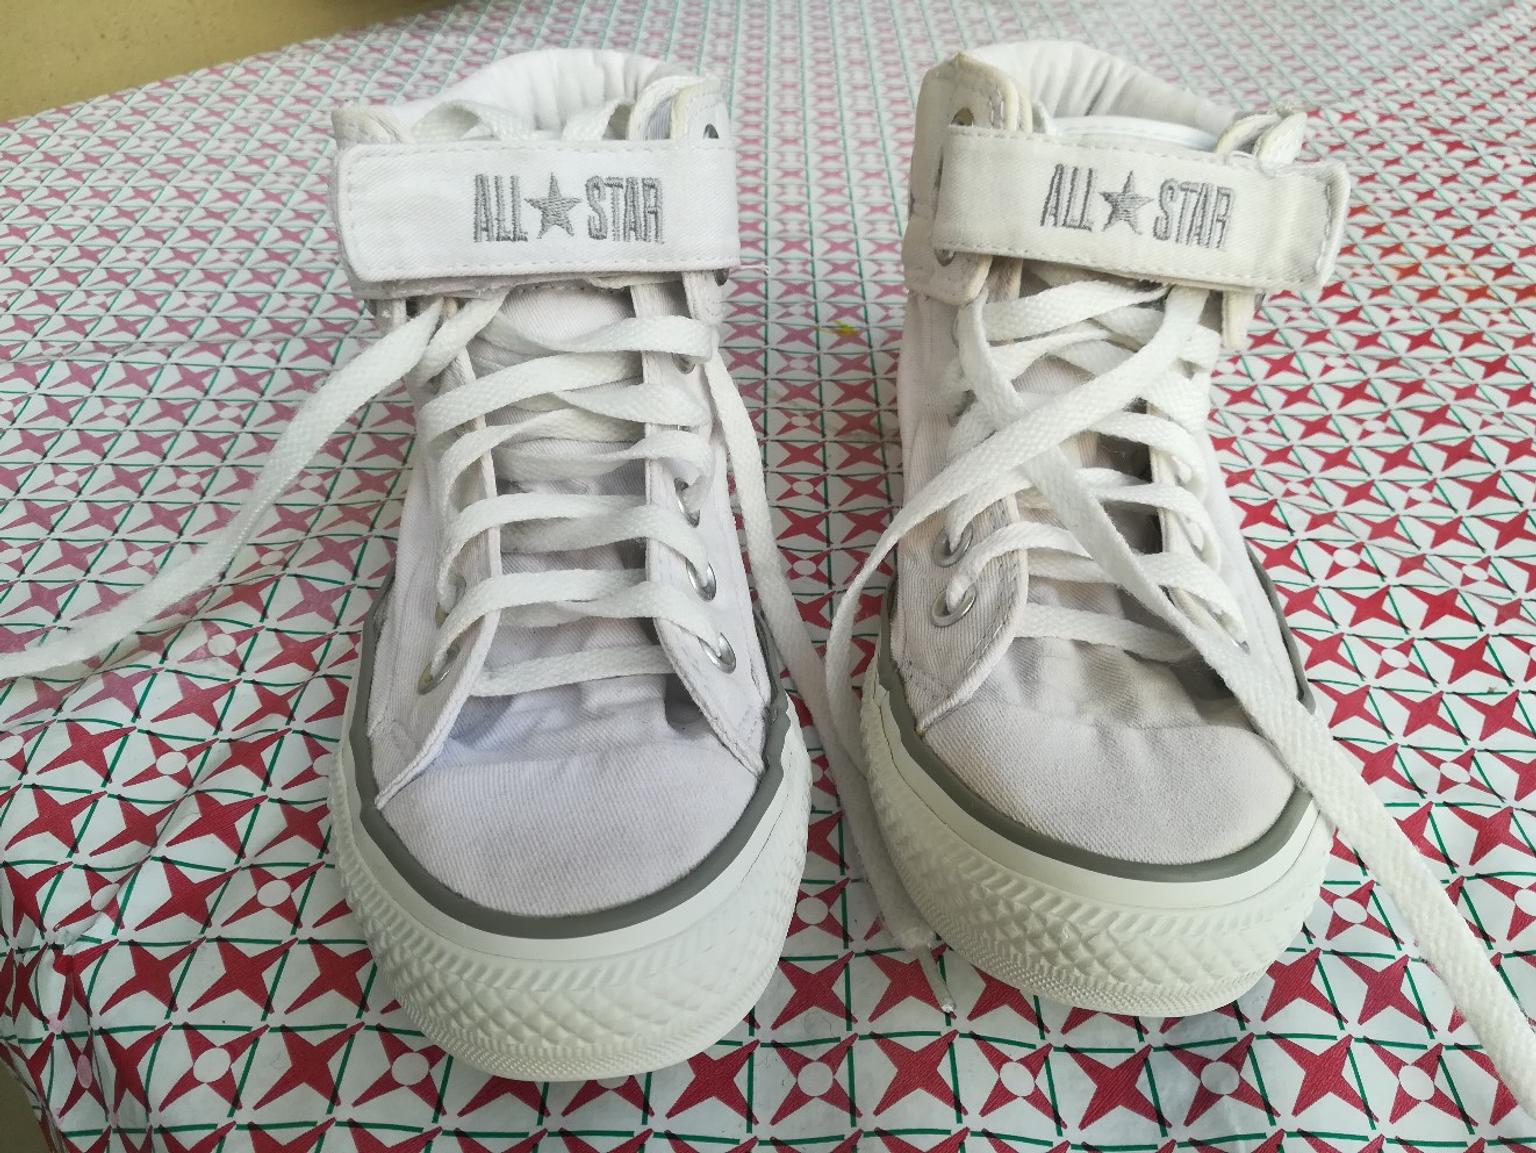 Converse all star bianche, tg 36.5 in 20131 Milano for €10.00 for sale |  Shpock